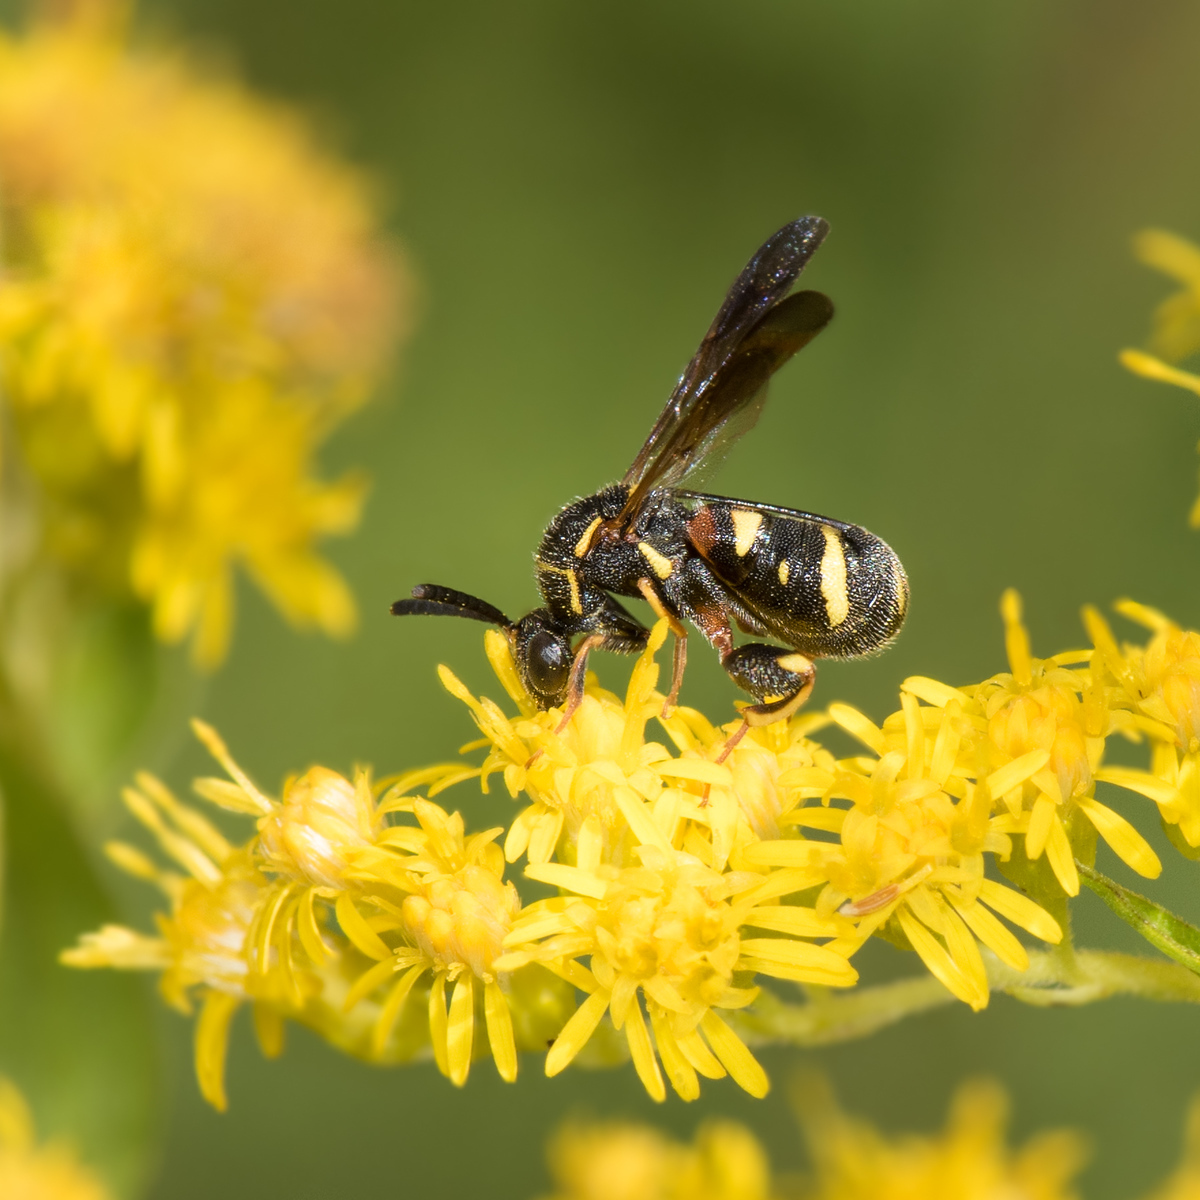 Wasps comprise 15 percent of the total number of flower-visiting insects worldwide. HEATHER HOLM